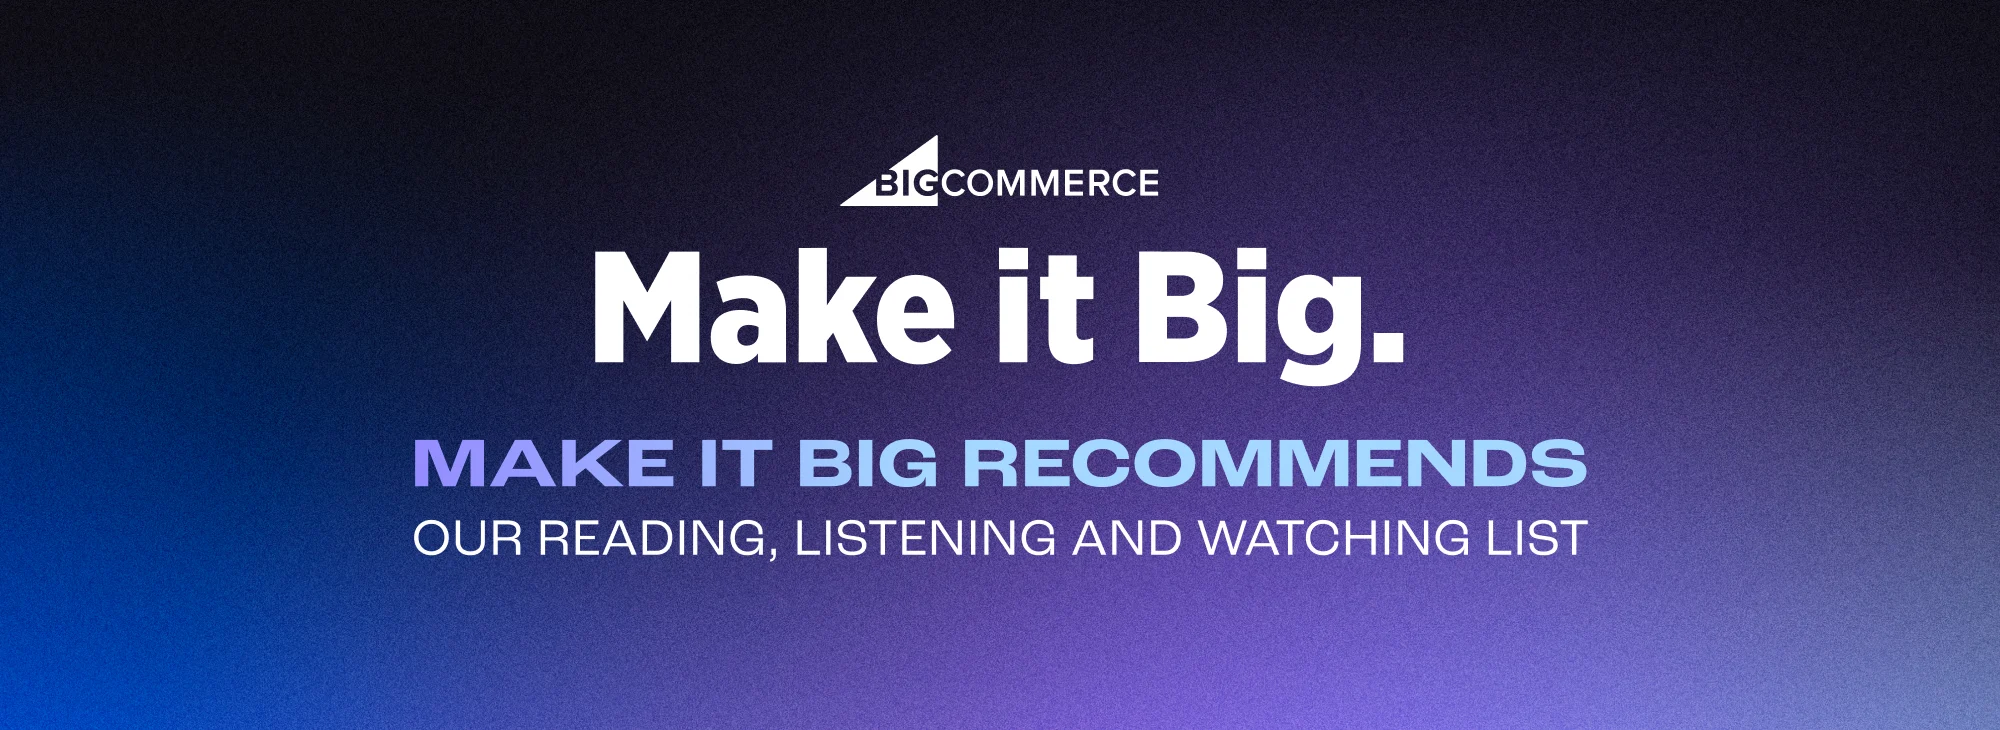 https://cms-wp.bigcommerce.com/wp-content/uploads/2022/10/5427CD_MIB-Blog_Recommended-Reads.png